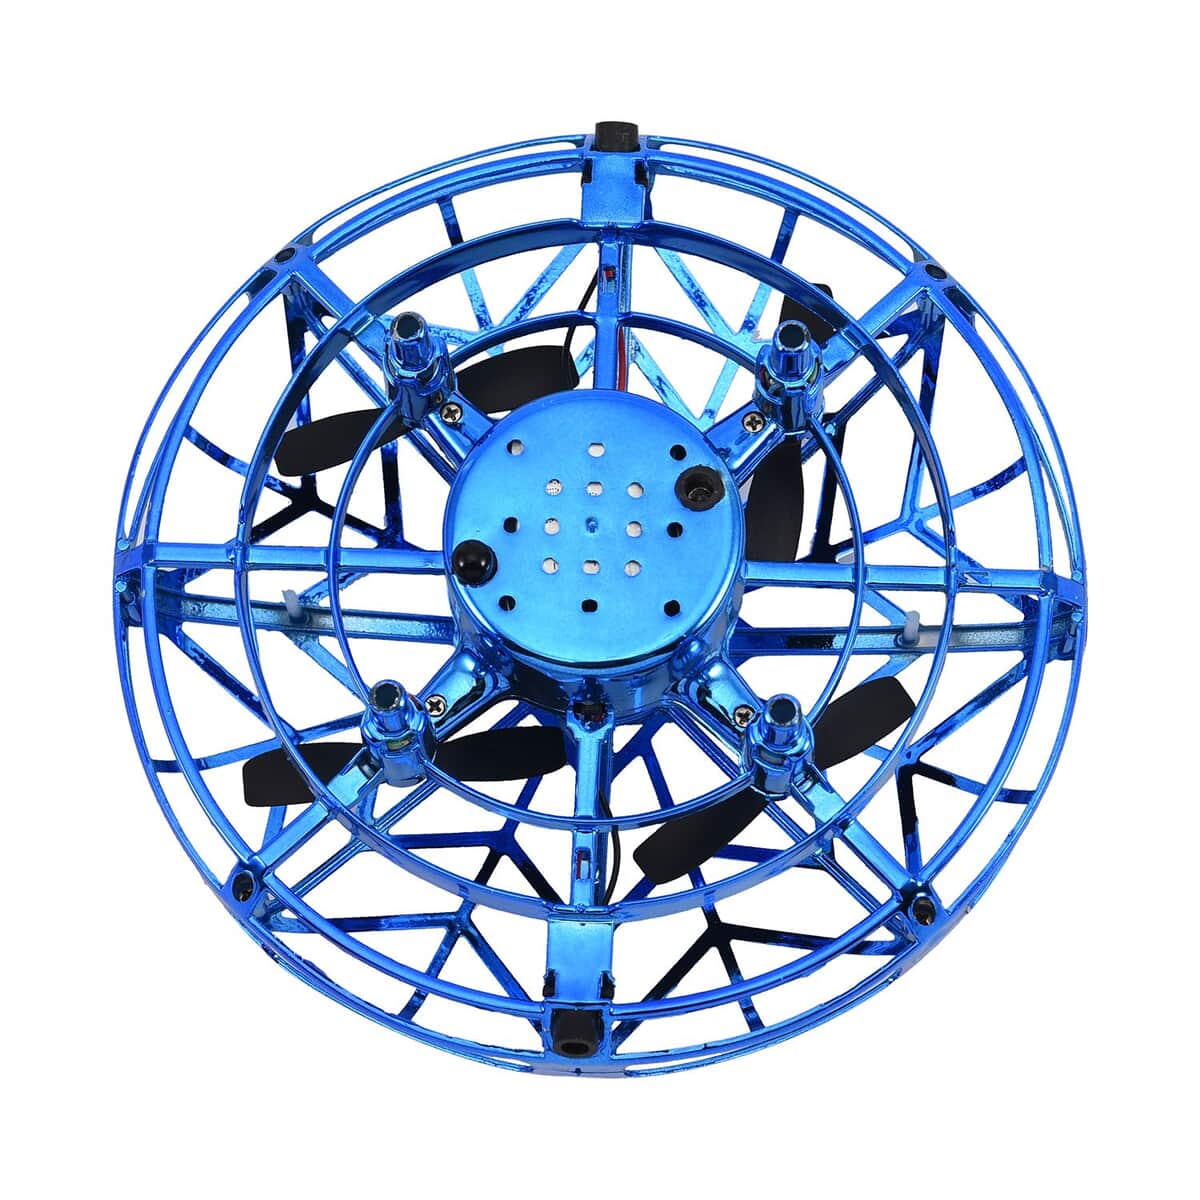 "Name: UFO Flying Ball -blue  material:ABS material size:4.53*4.53*1.77inches weight:85g battery: 300mah " image number 6